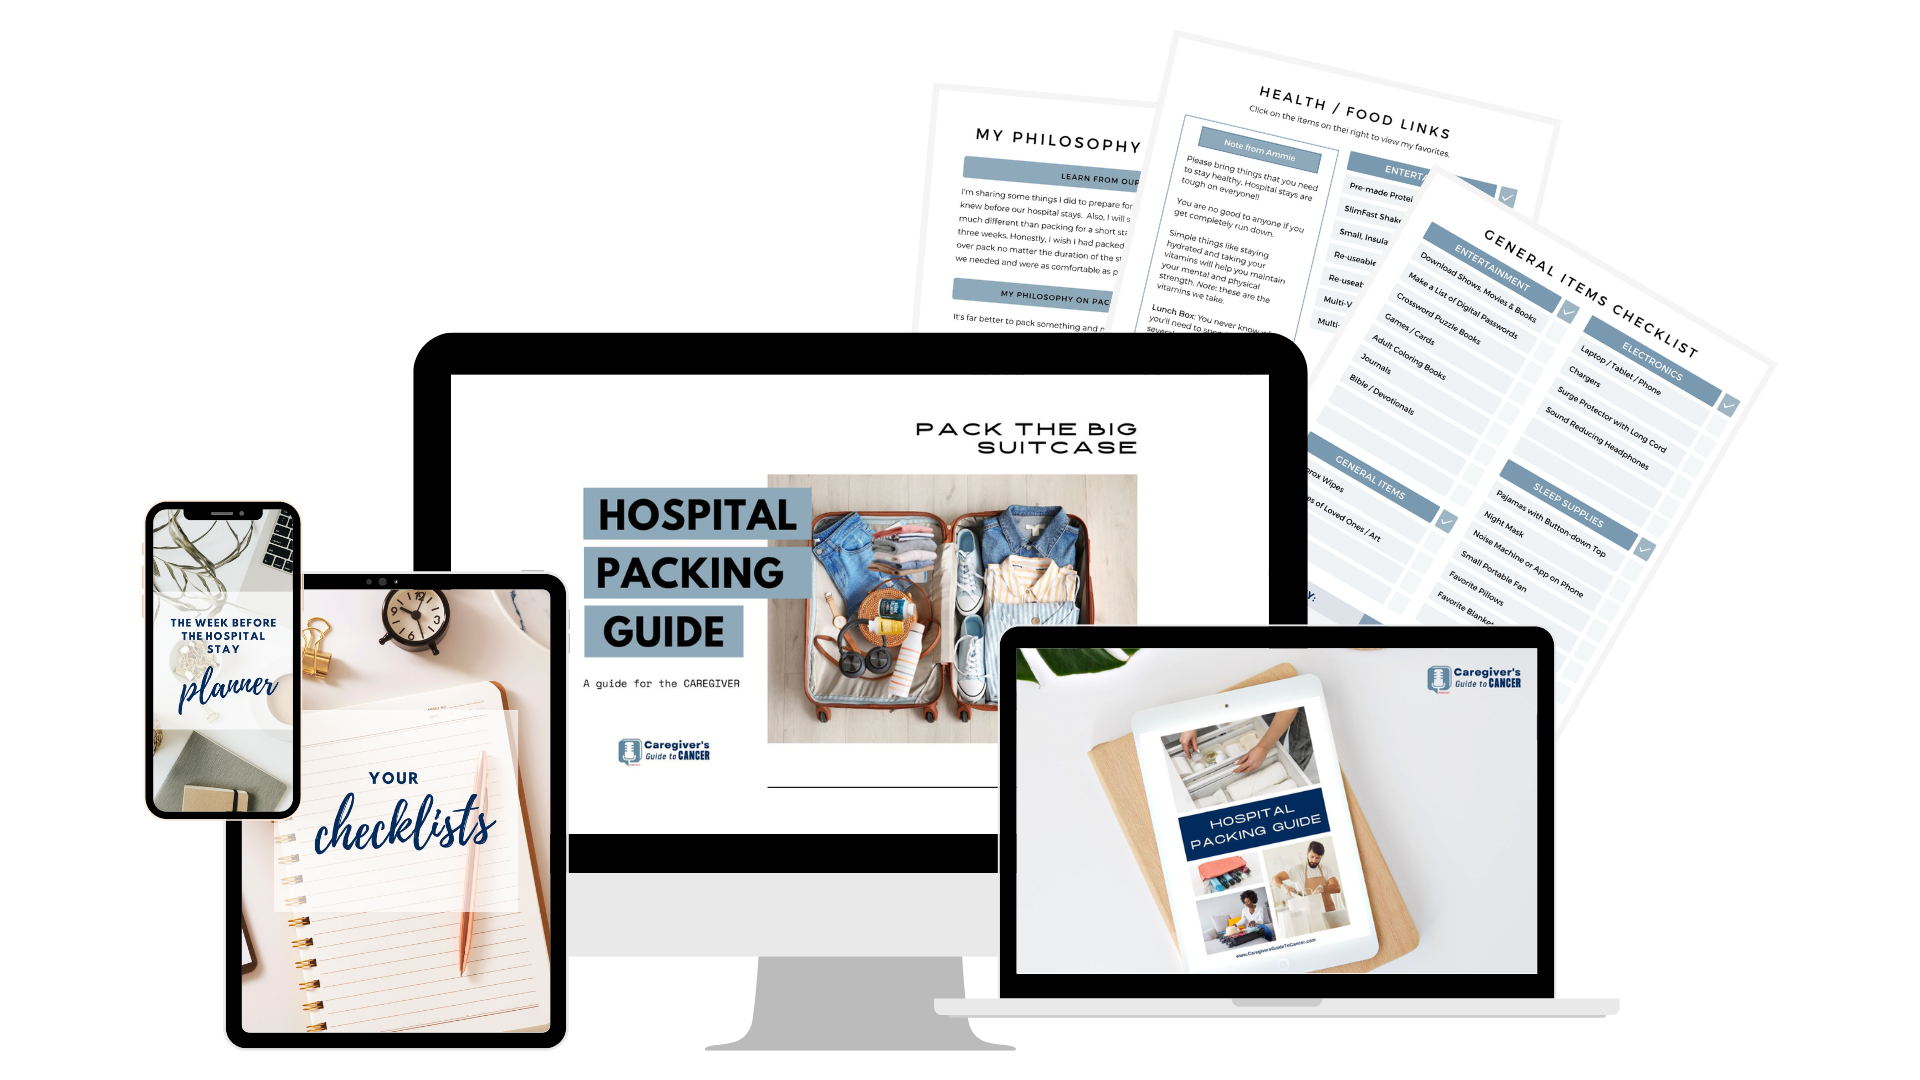 Caregiver's Guide to Cancer - Hospital Packing Guide - Checklist - Planner